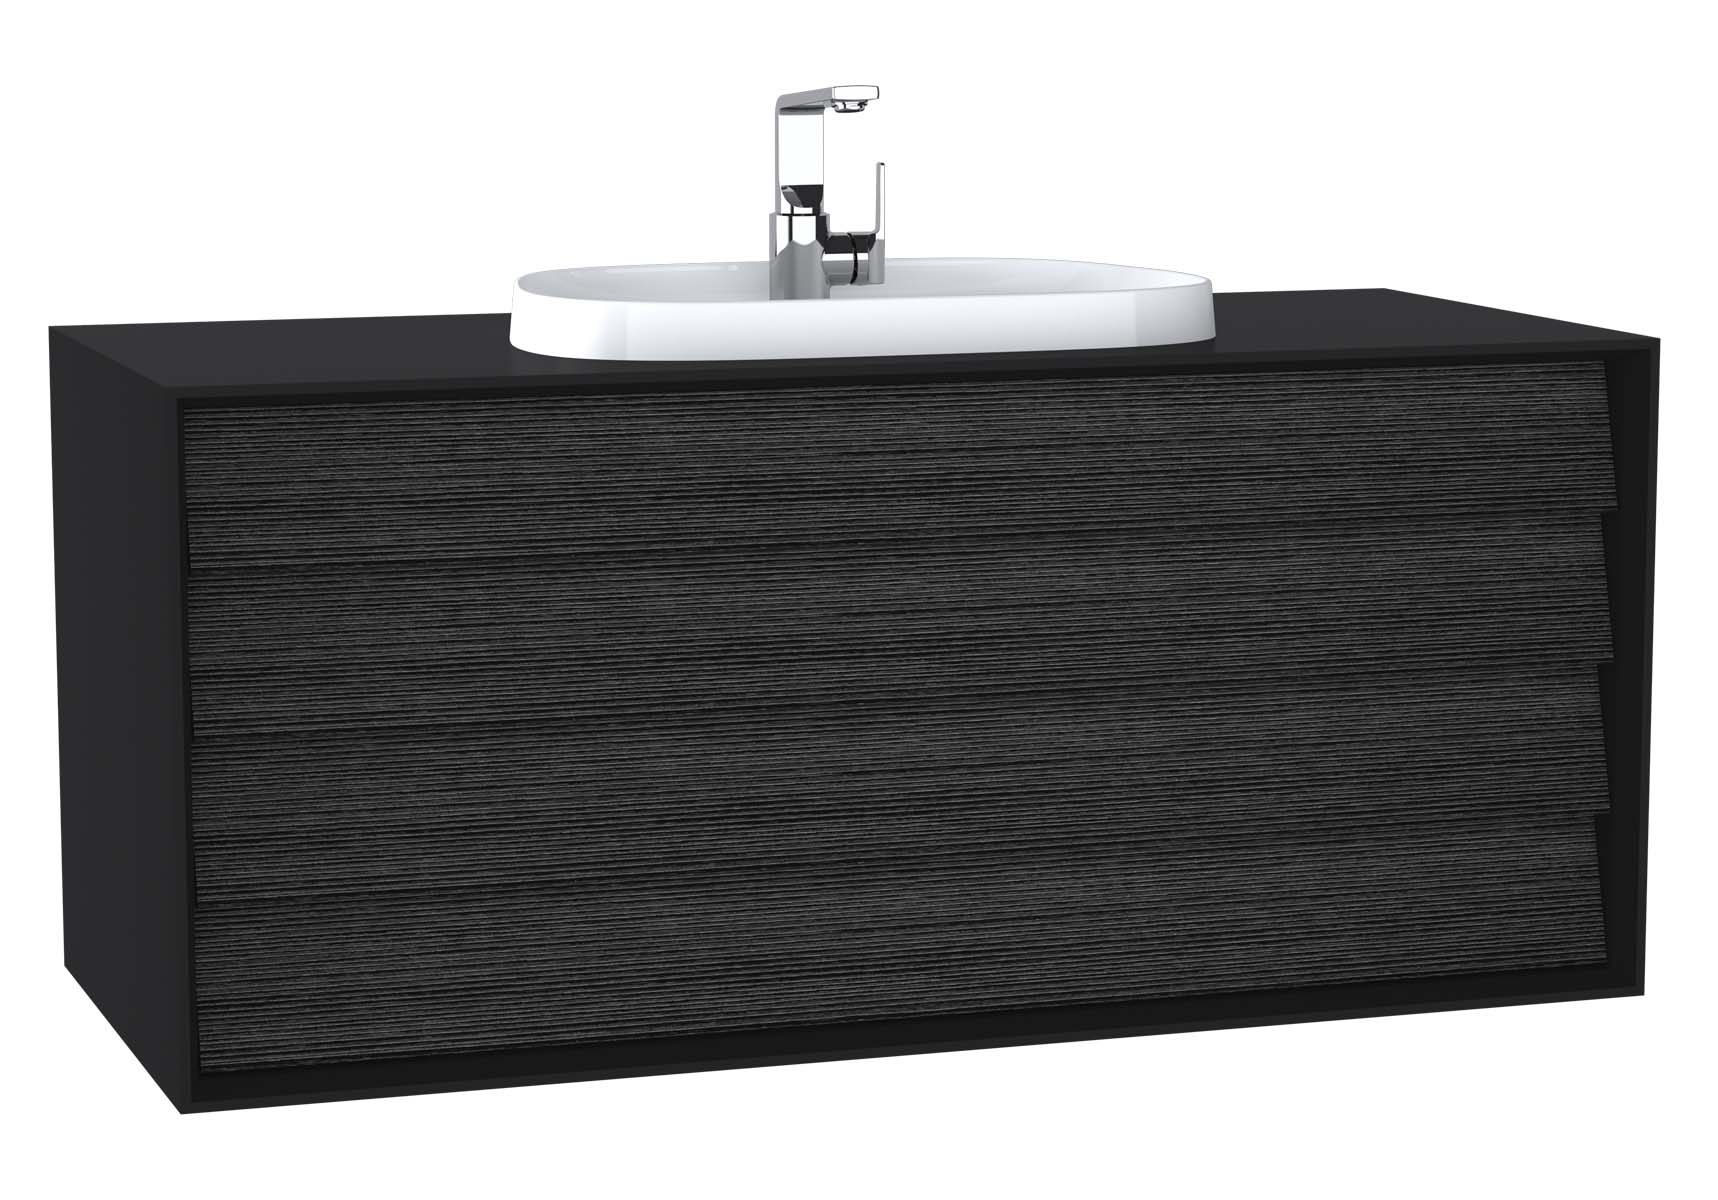 Frame Washbasin Unit, 120 cm, with 2 drawers, with countertop TV-shape washbasin, with faucet hole, Matte Black